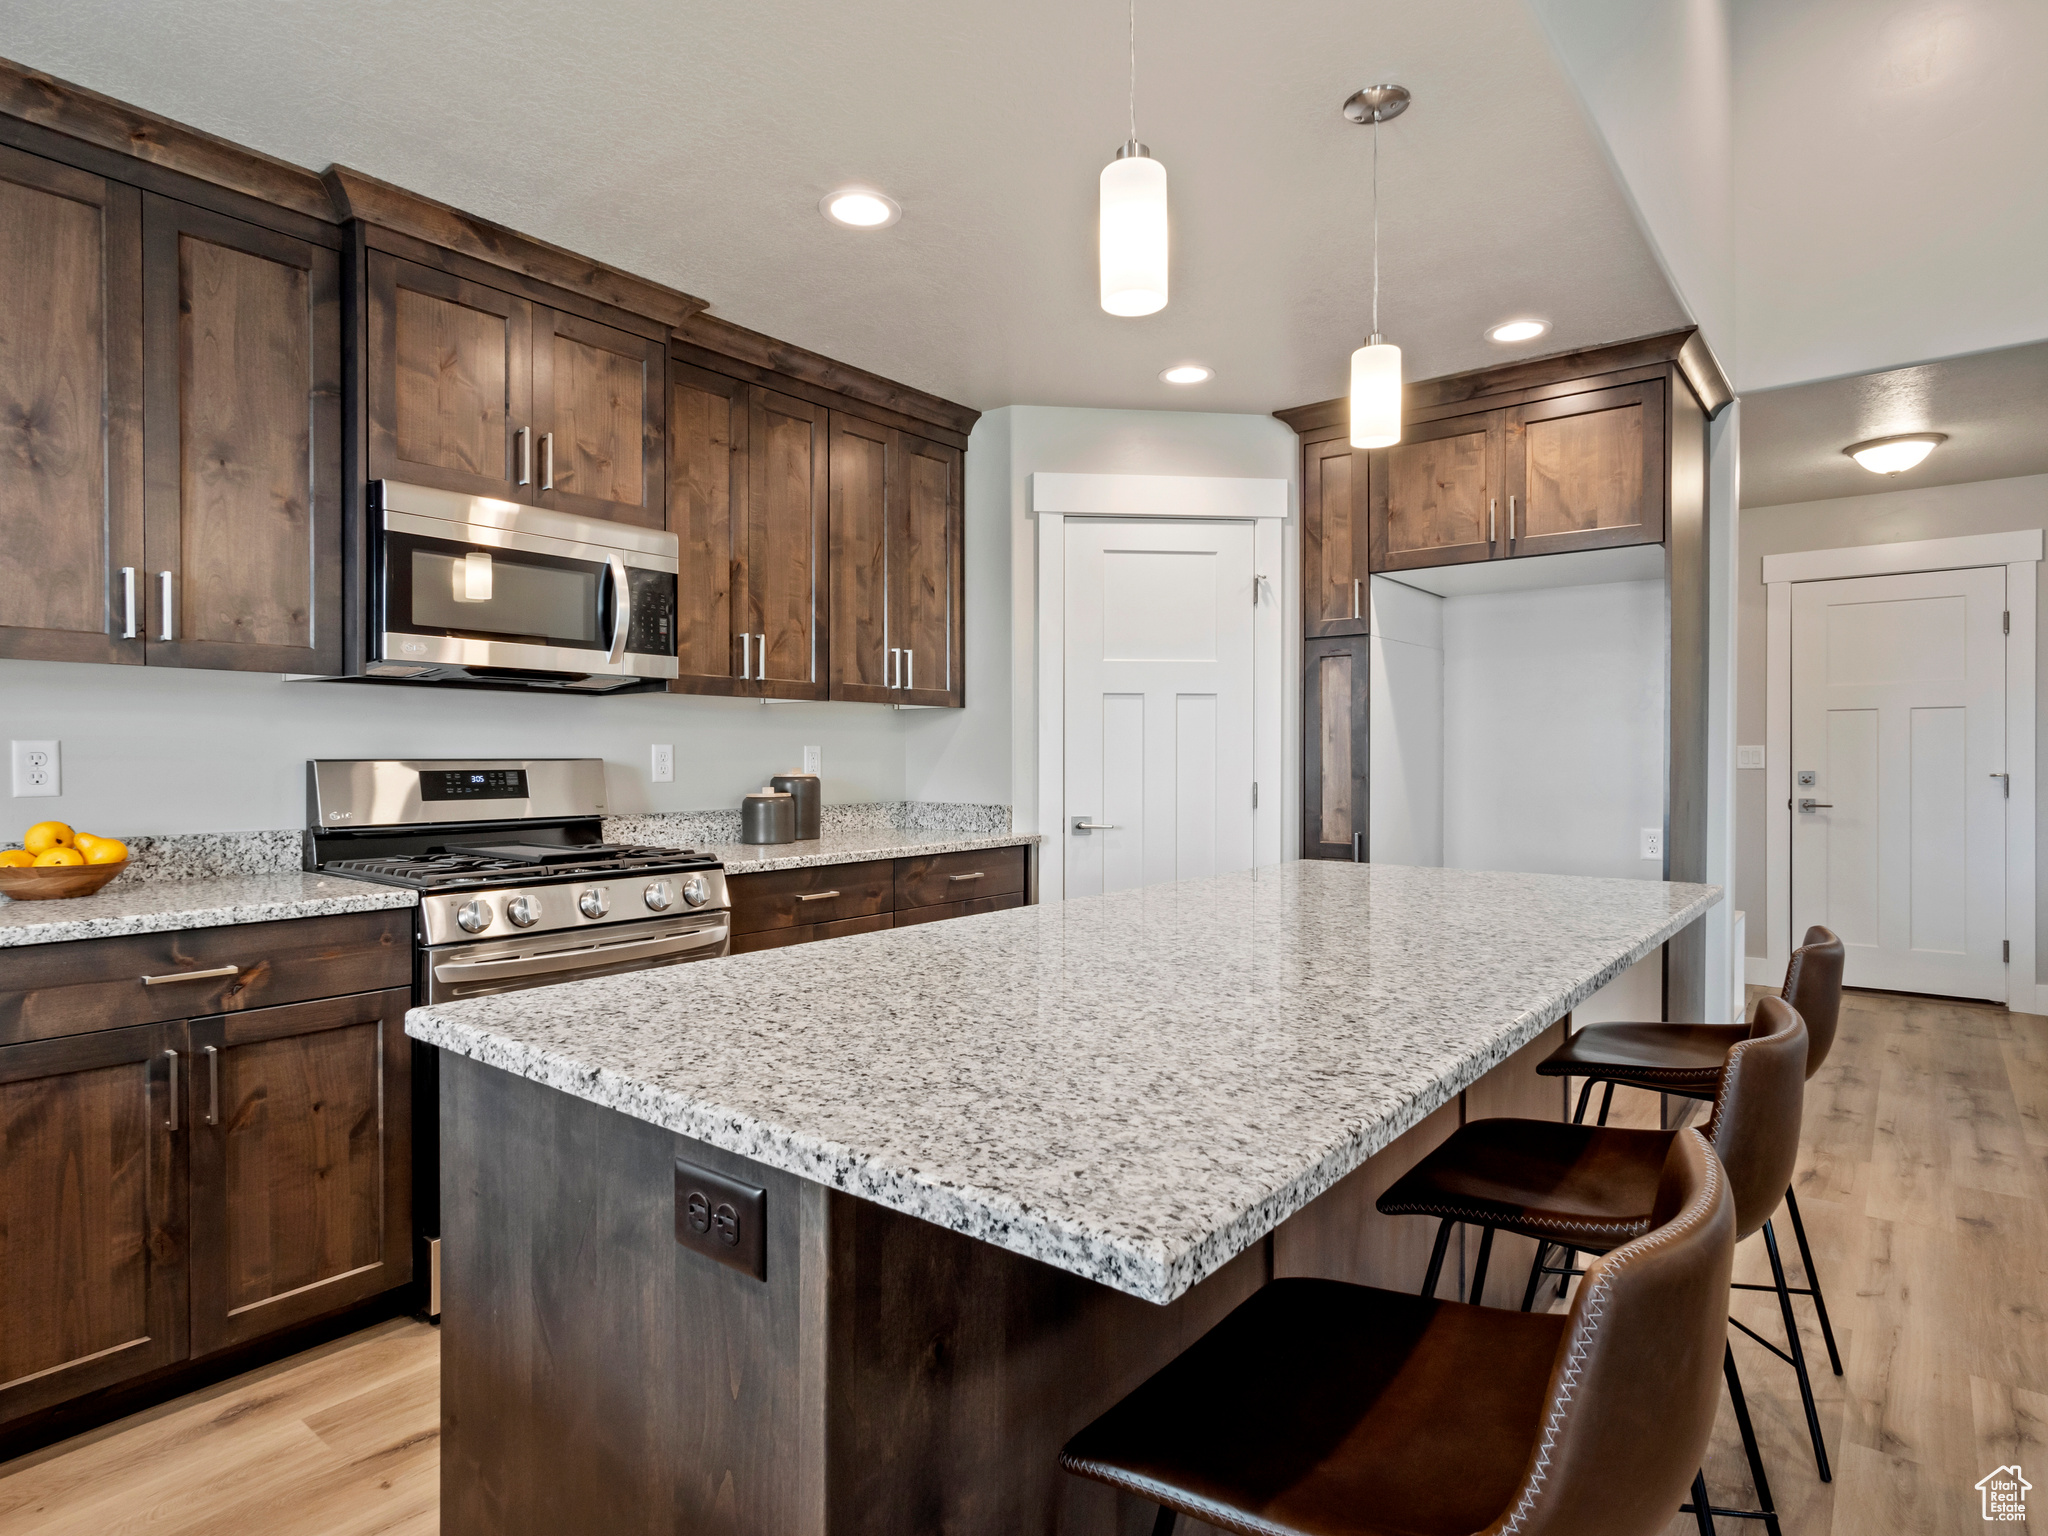 Kitchen featuring pendant lighting, appliances with stainless steel finishes, a breakfast bar area, light stone counters, and light hardwood / wood-style floors